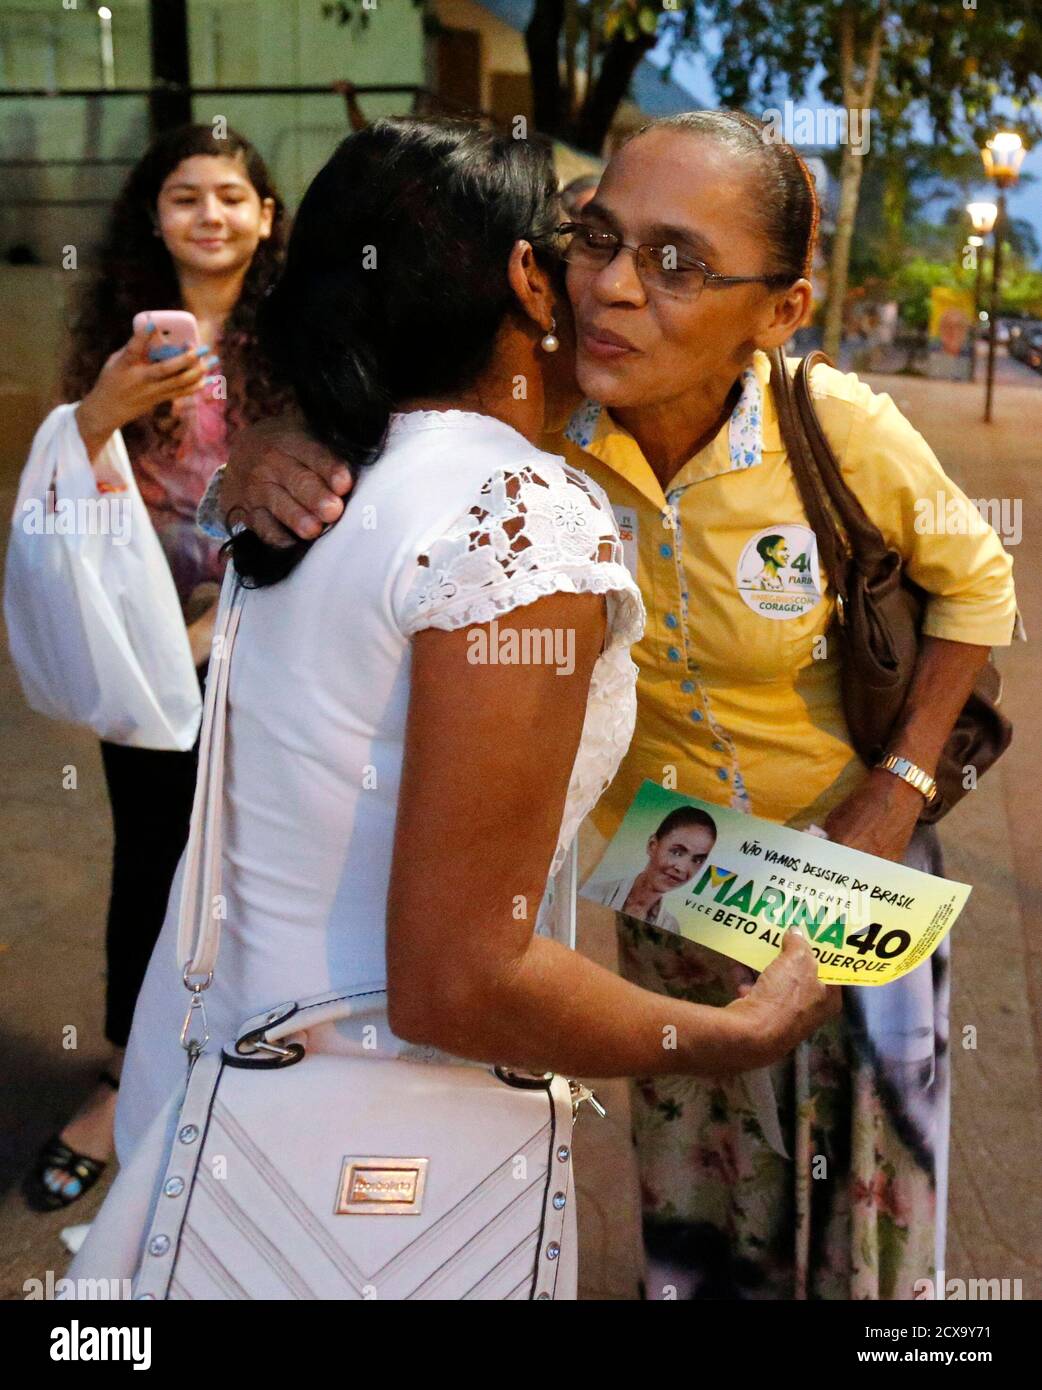 Maria Lucia (R), sister of Brazilian Socialist Party (PSB) presidential candidate Marina Silva, kisses a supporter during a campaign rally in Rio Branco, Acre state October 3, 2014. Brazil will hold its general elections on October 5, to elect the country's National Congress, president, state governors and state legislatures.   REUTERS/Sergio Moraes  (BRAZIL - Tags: POLITICS ELECTIONS) Stock Photo